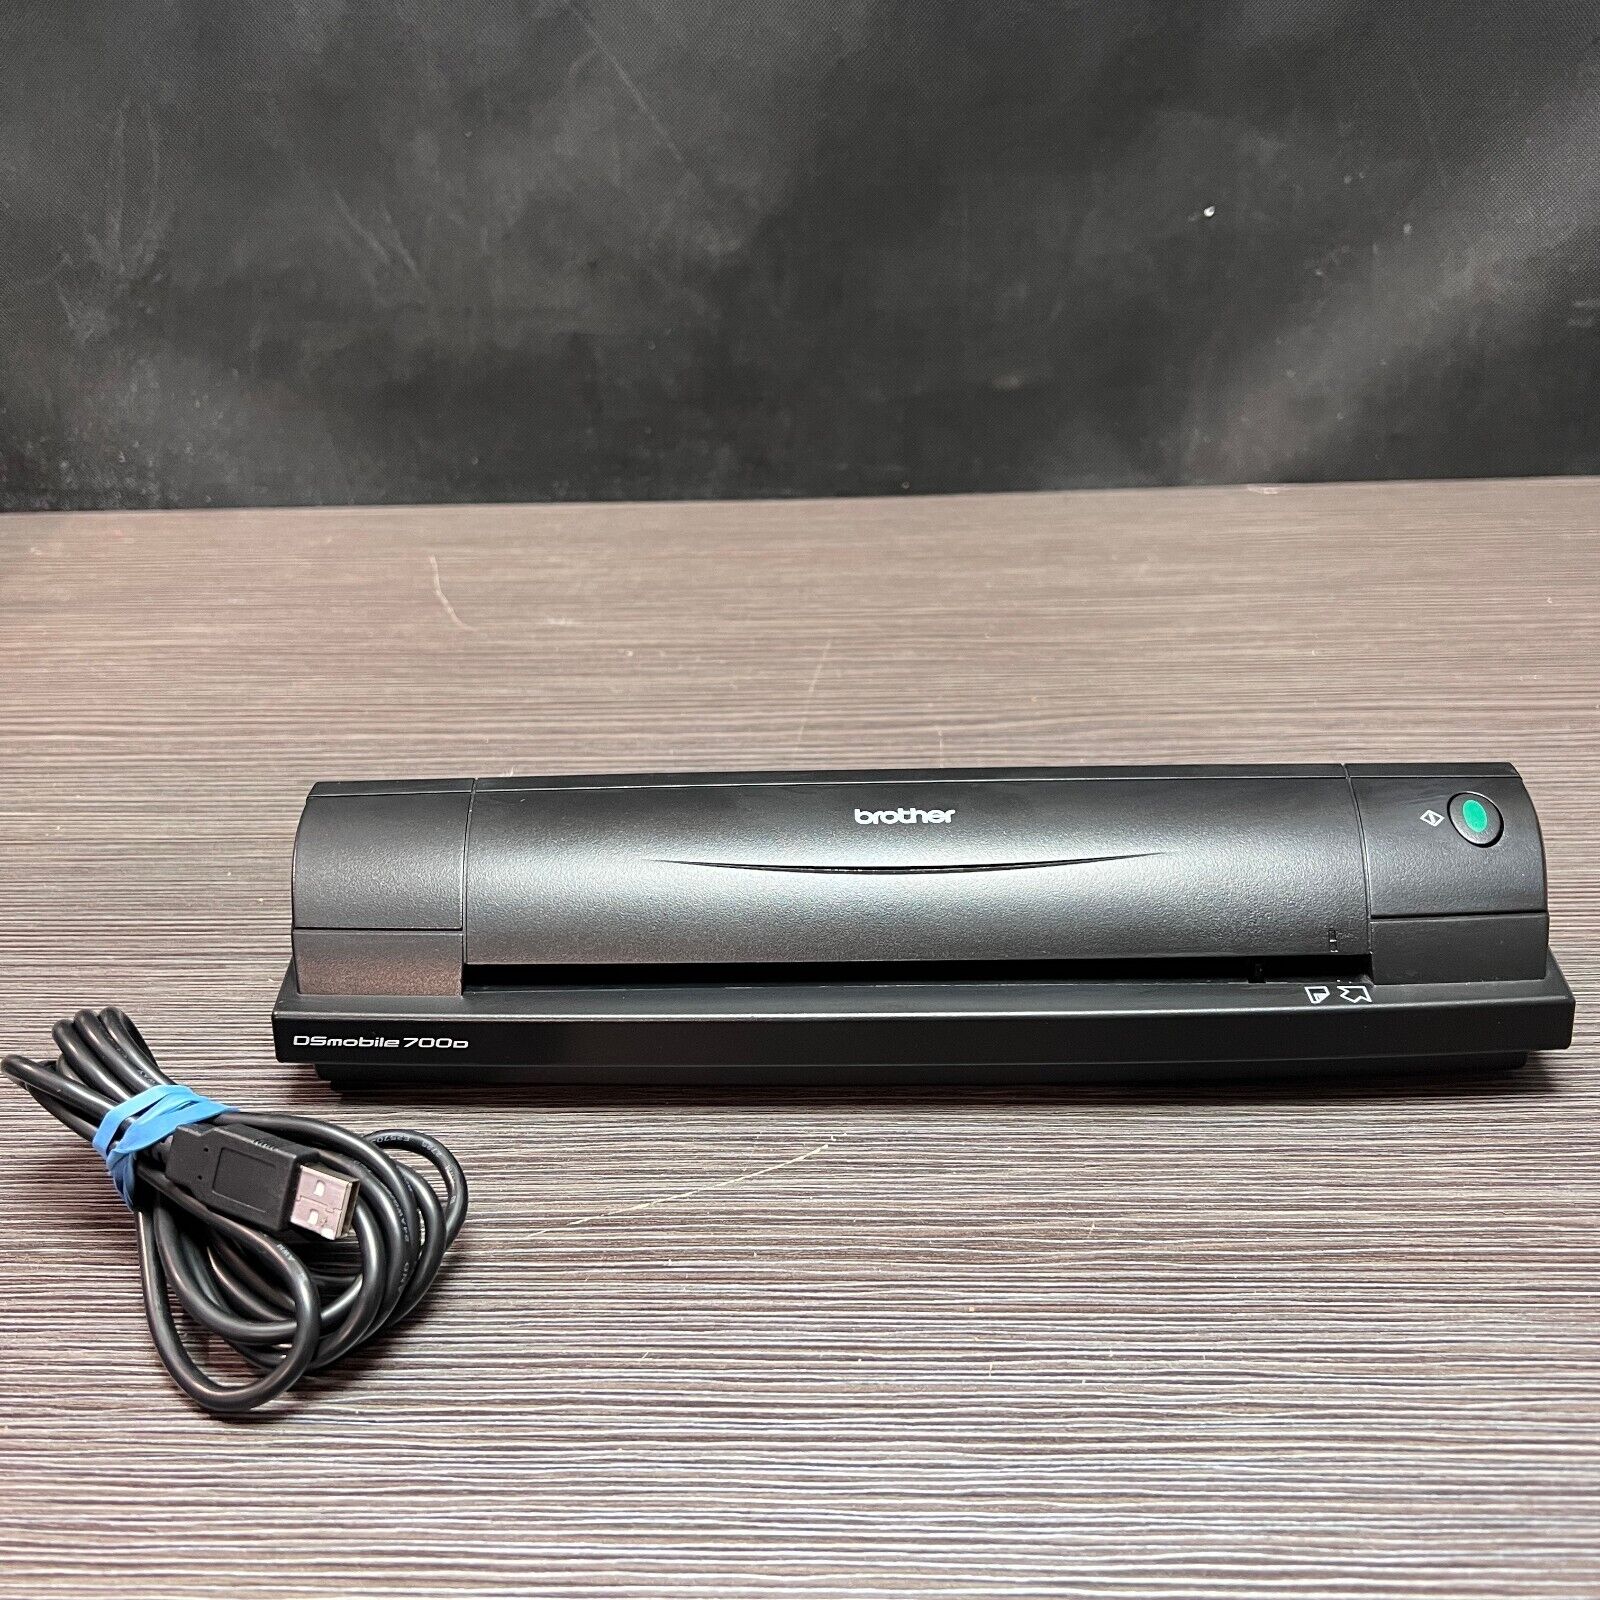 Brother DS-700D Mobile Duplex Color Page Scanner Model DS700D With Cord.